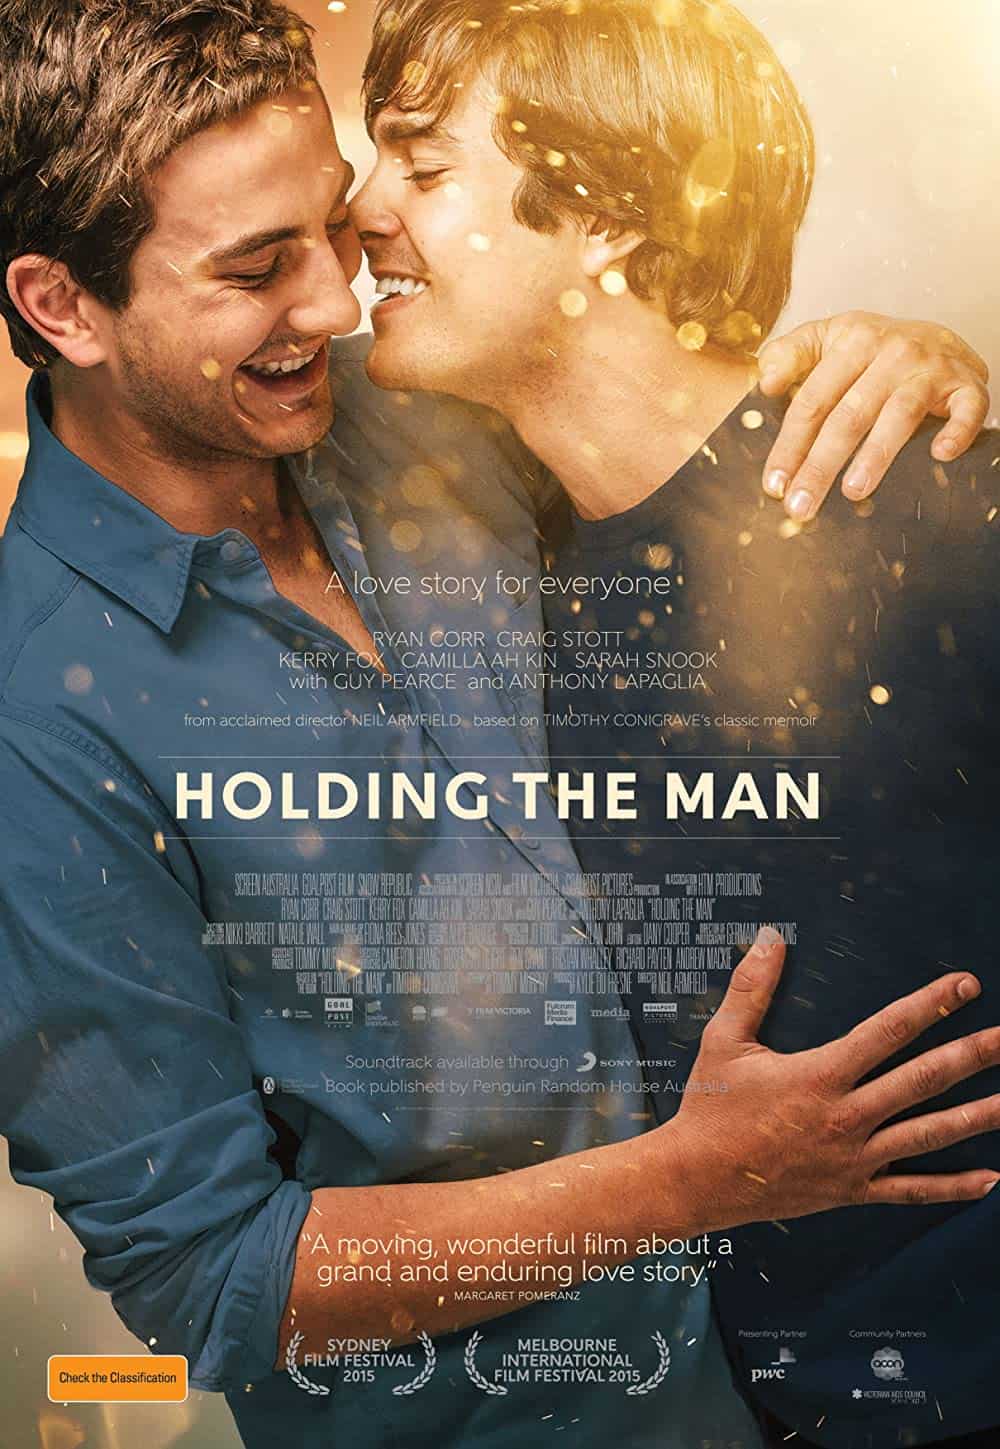 Call Me By Your Name similar movie Holding the Man (2015)